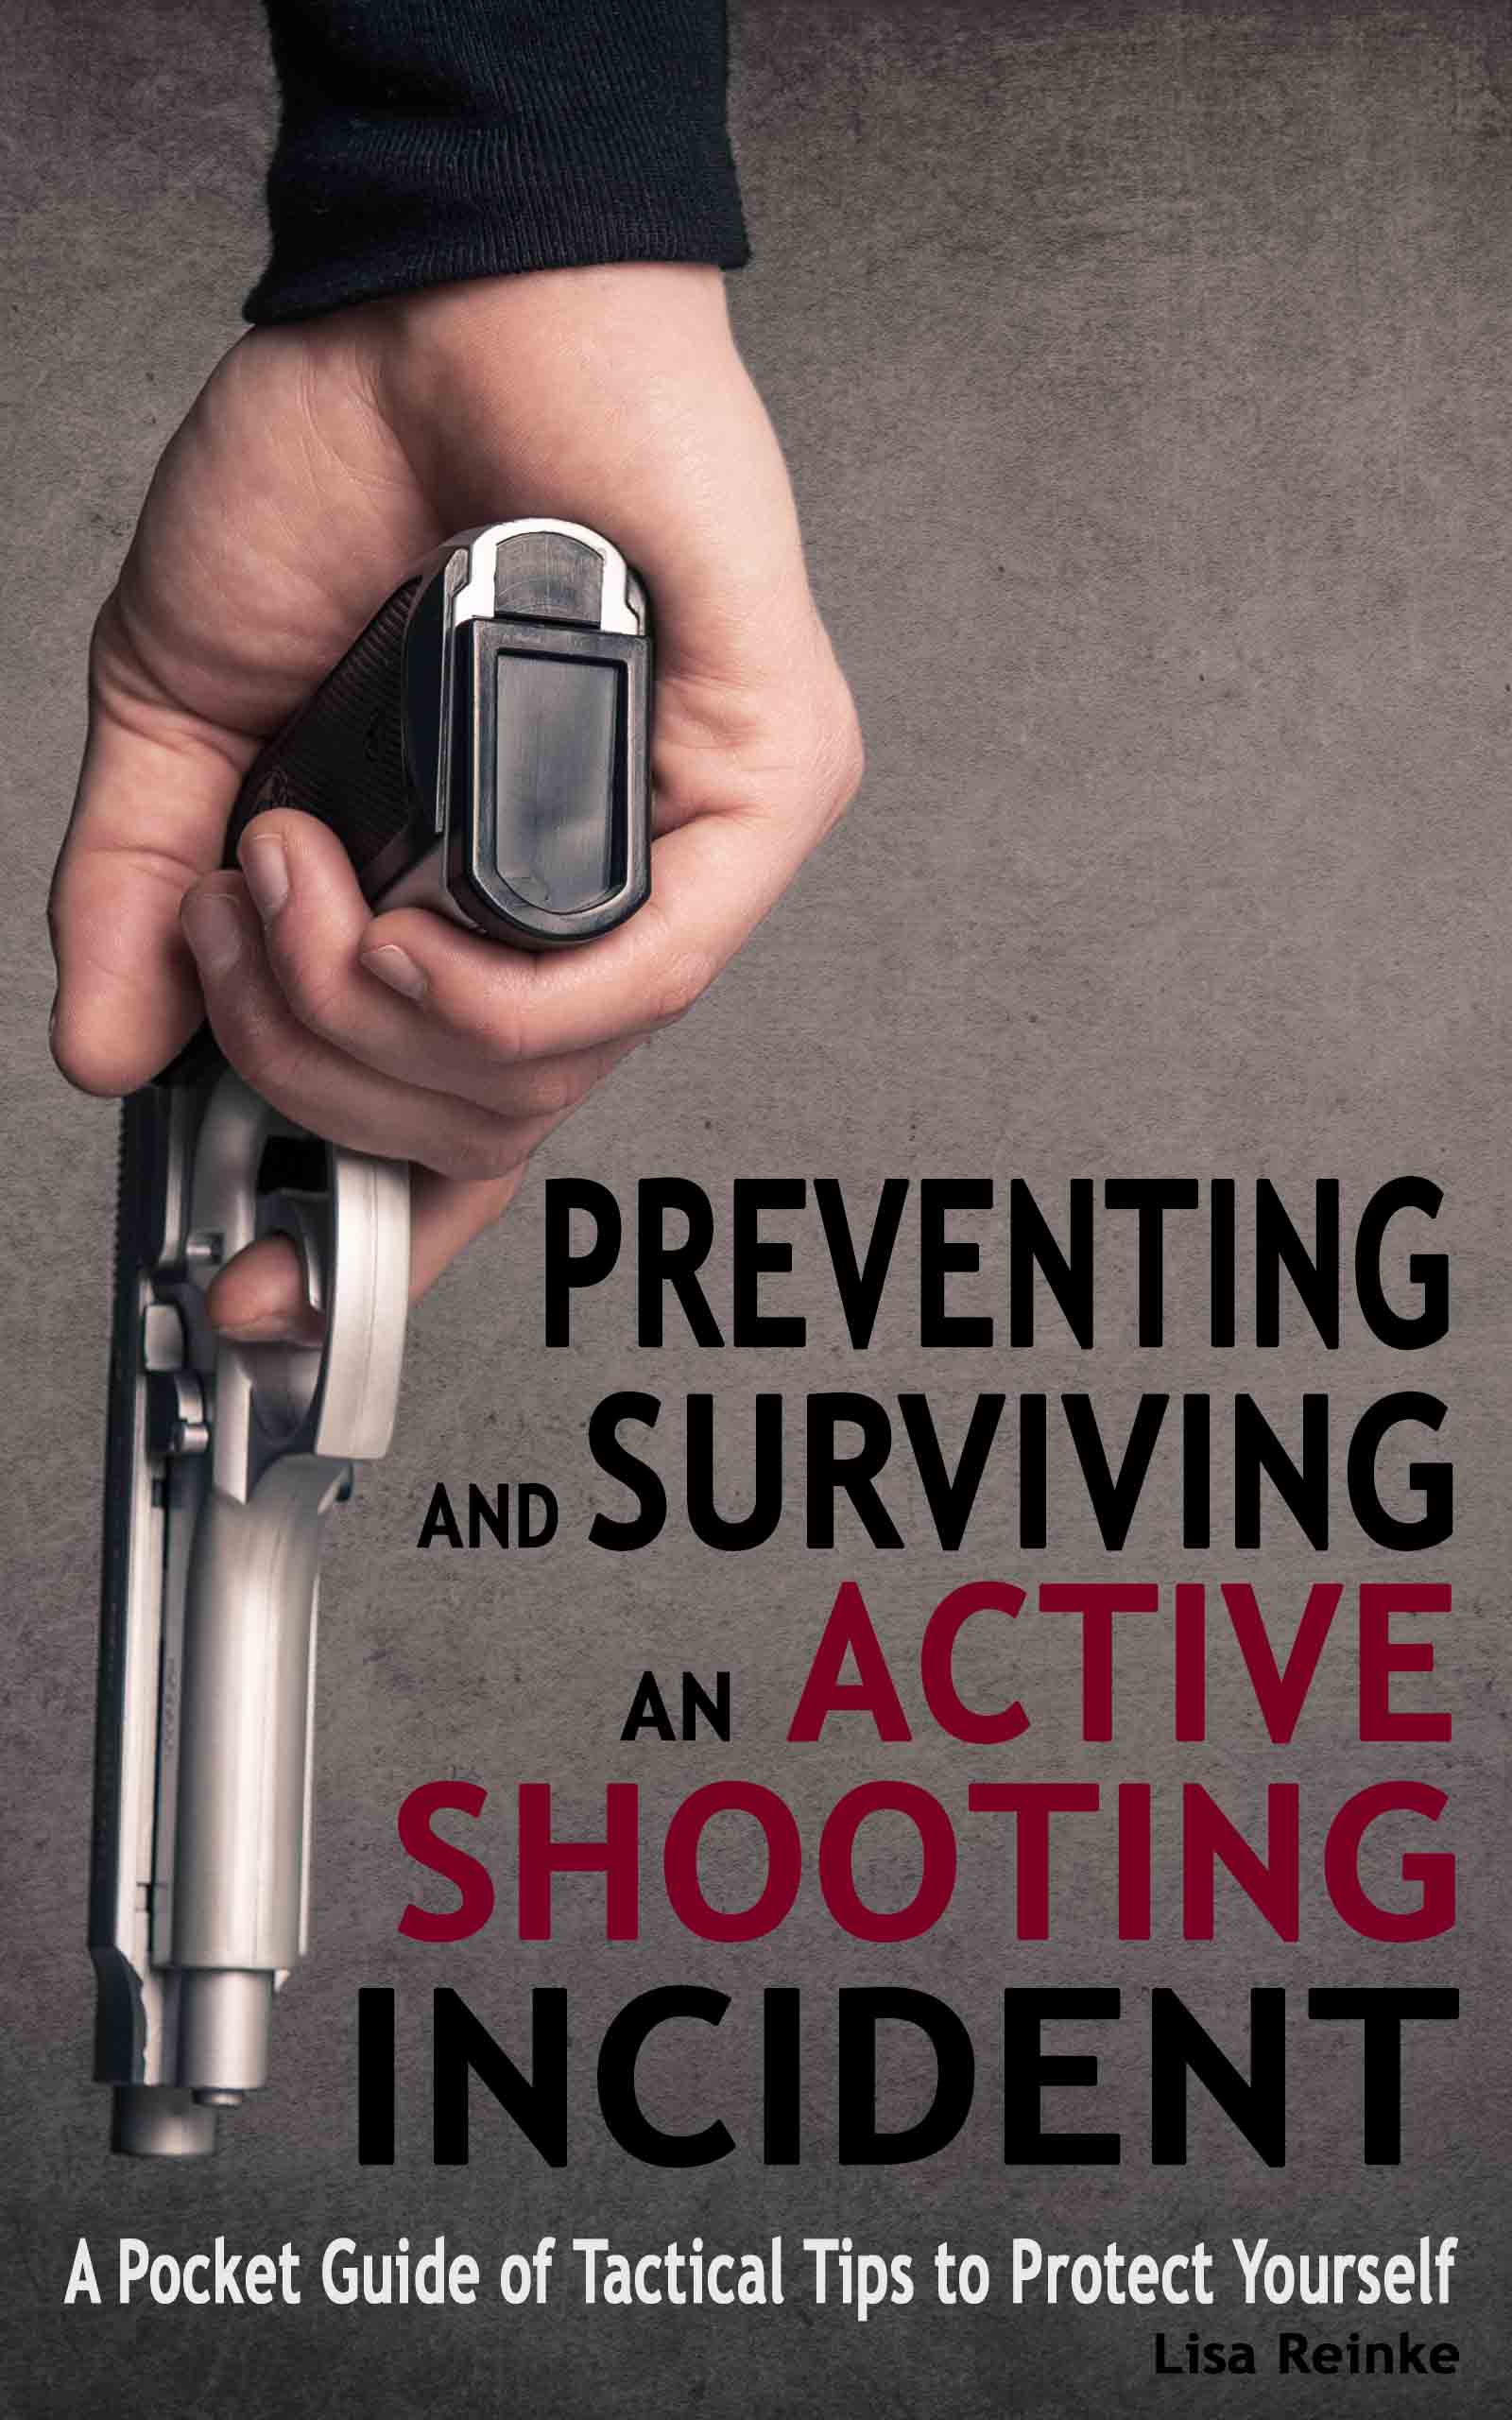 FREE: Preventing and Surviving an Active Shooting Incident: A Pocket Guide of Tactical Tips to Protect Yourself by Lisa Reinke